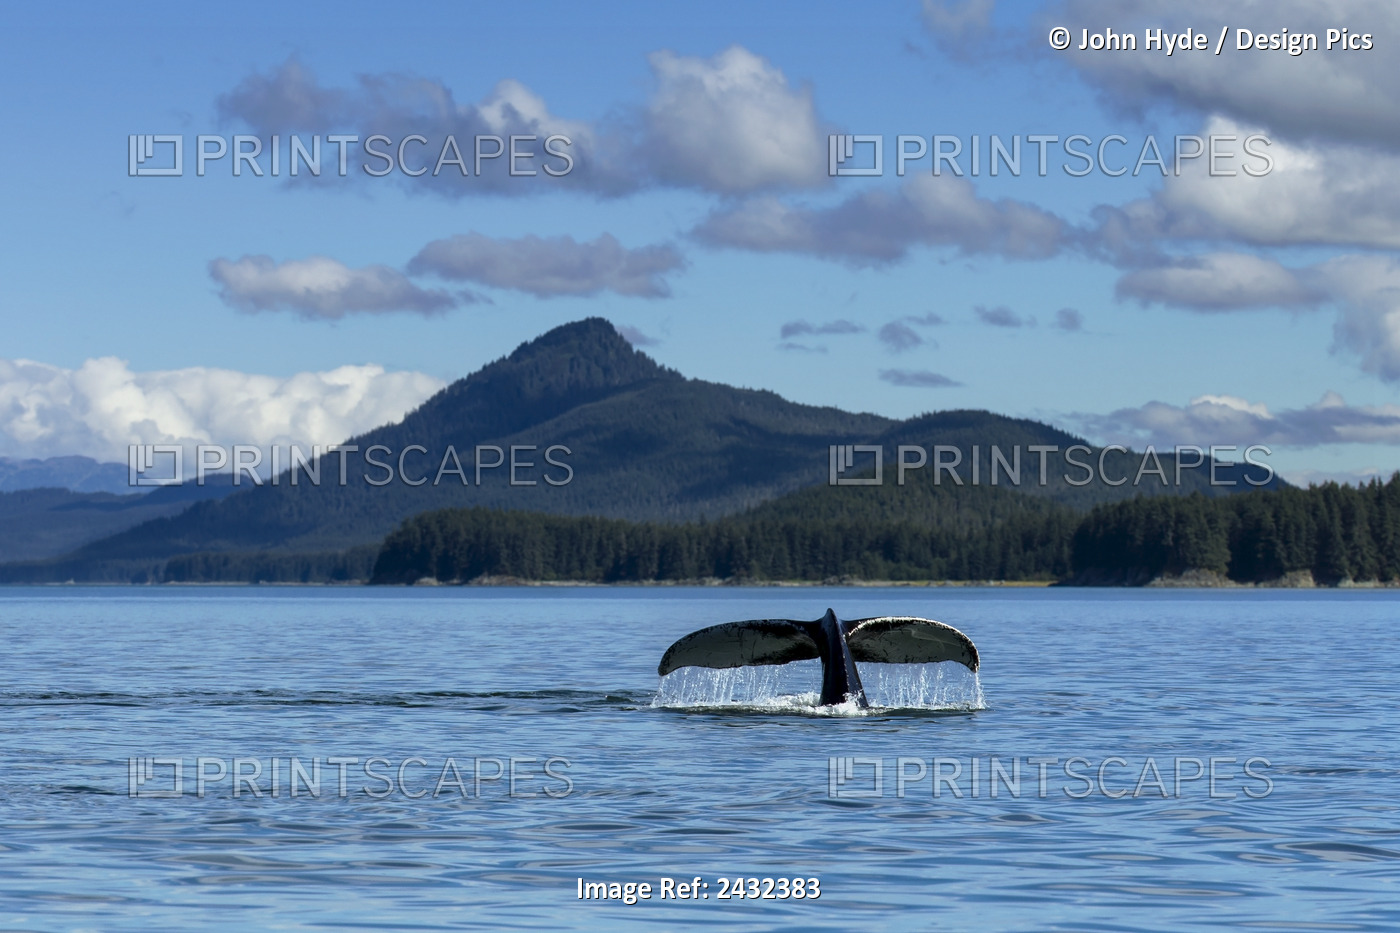 A Humpback Whale Lifts Its Flukes As It Returns To The Depths To Feed In The ...